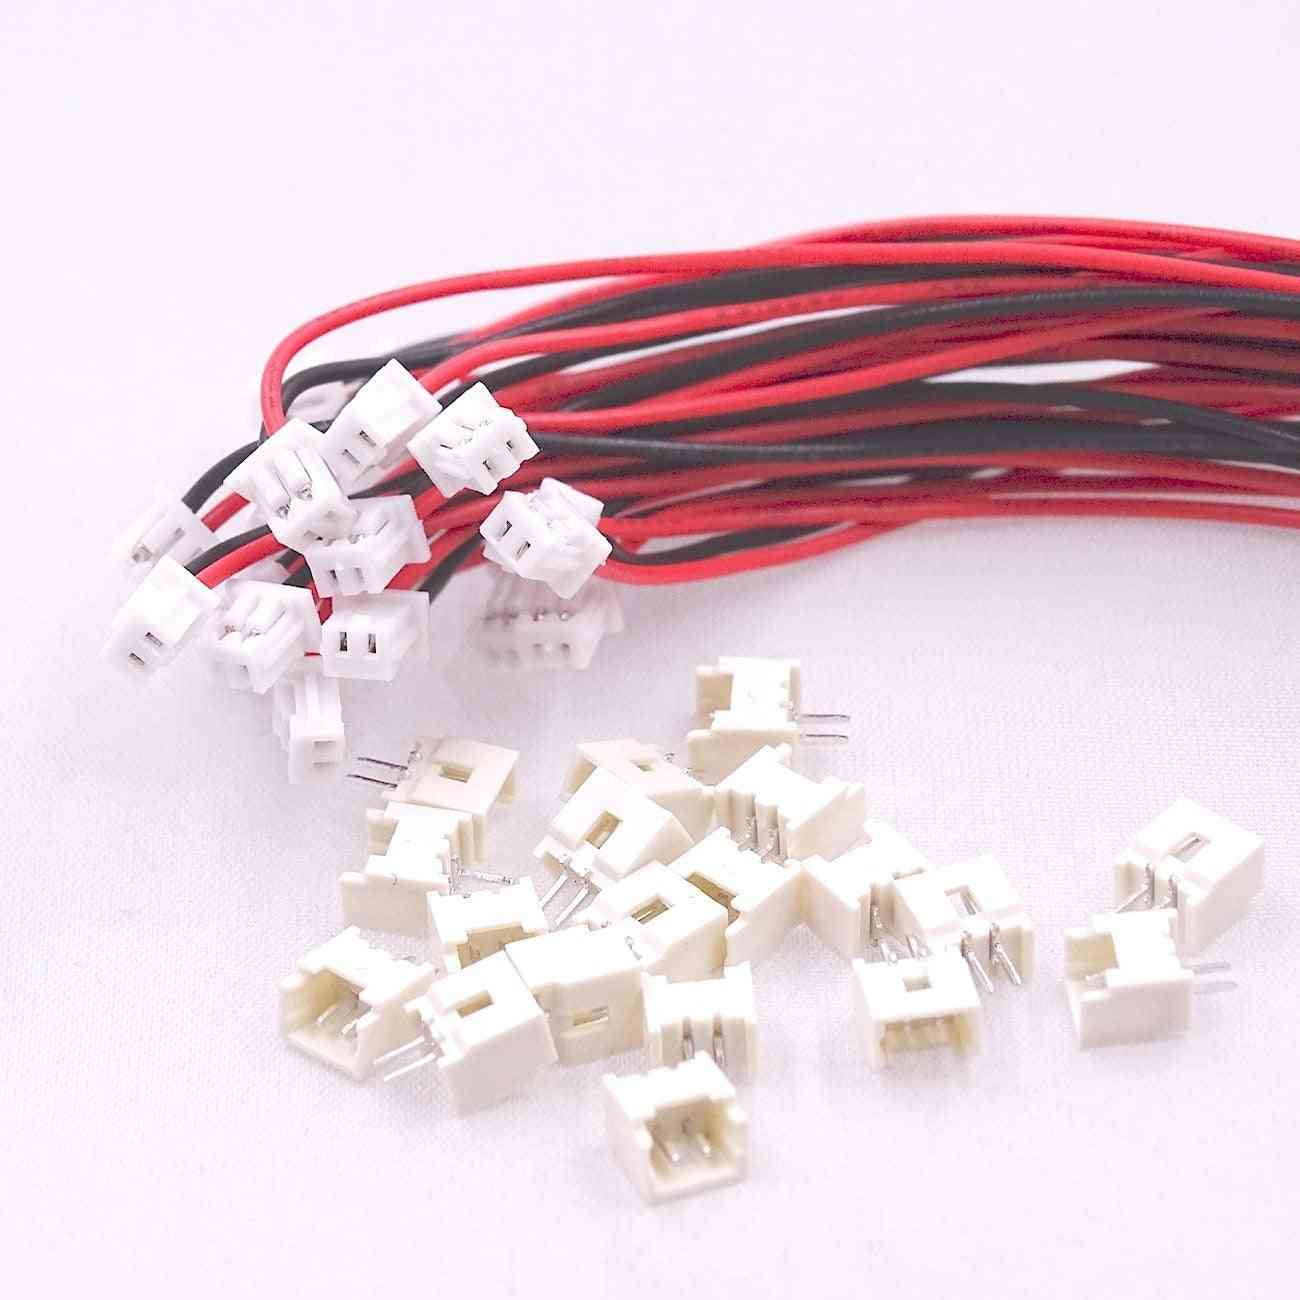 2-pin Connector With Wires Cables For Circuit Board